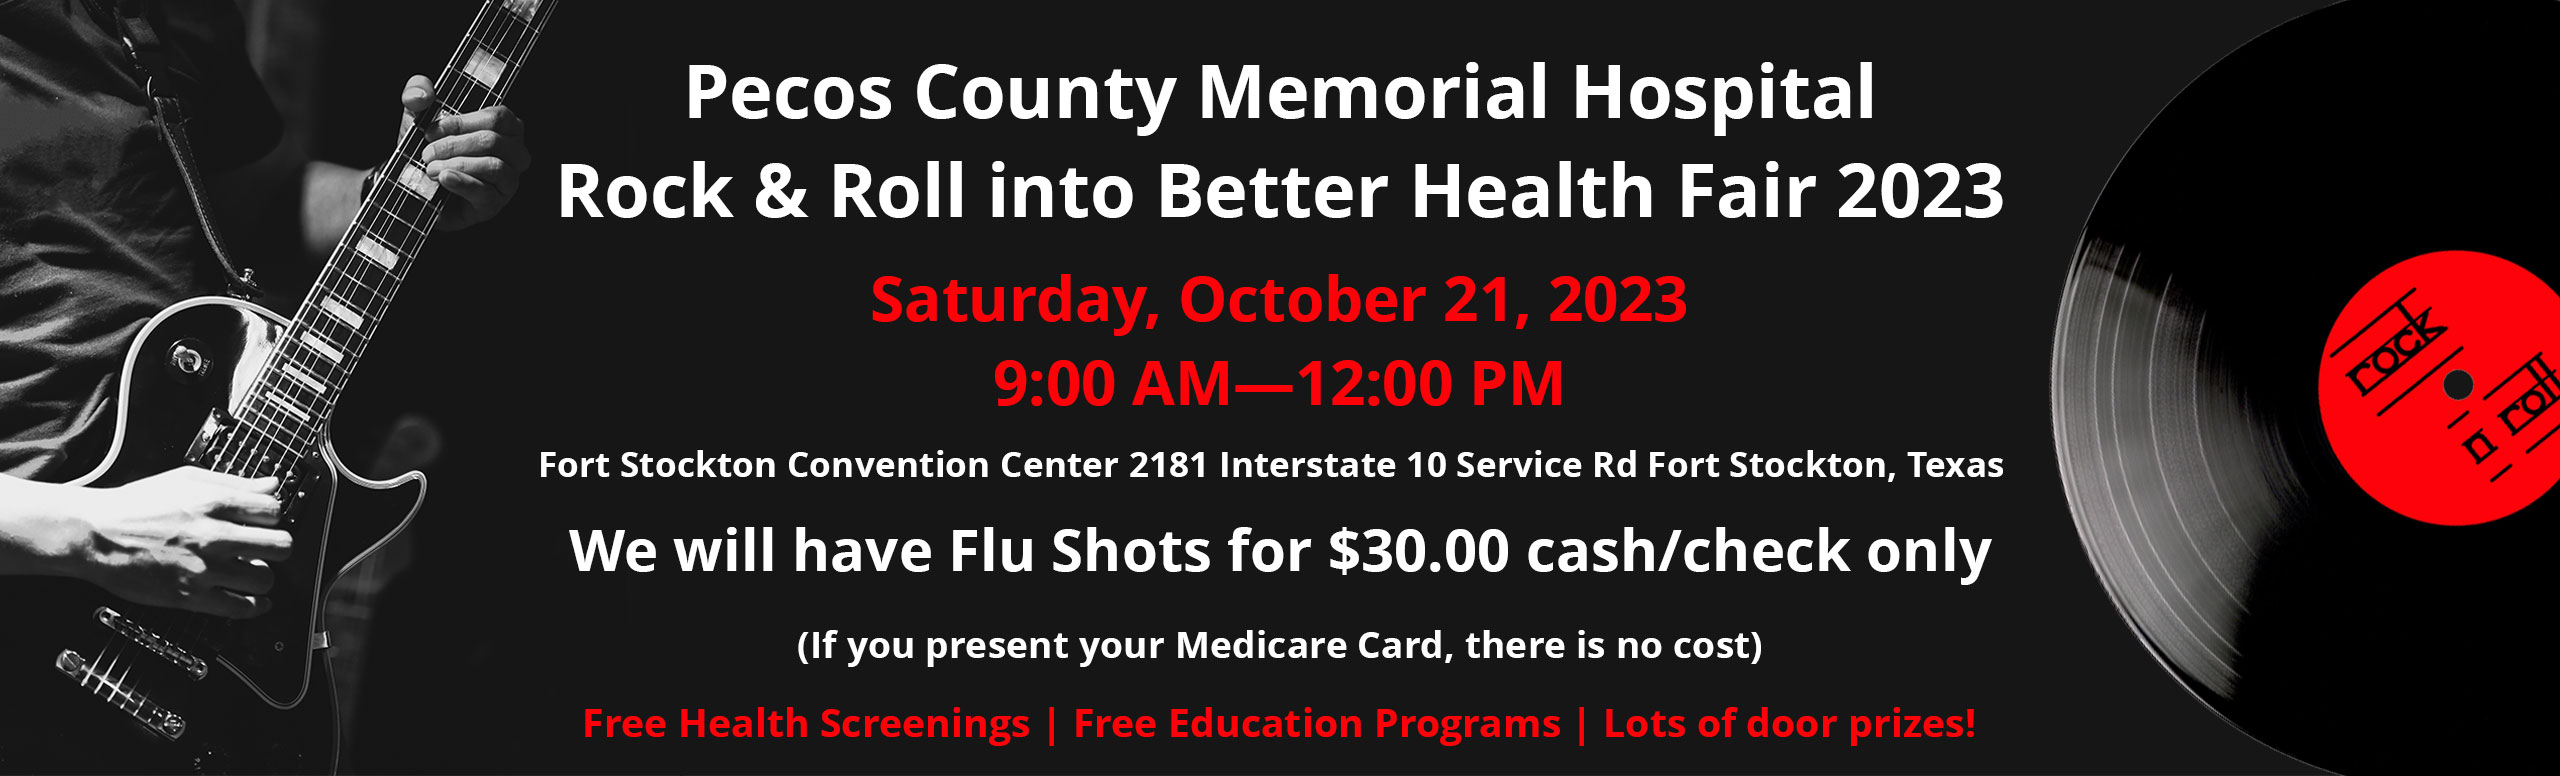 Pecos County Memorial Hospital Rock & Roll into Better Health Fair 2023

Saturday, October 21, 2023
9:00 AM—12:00 PM

Fort Stockton Convention Center 2181 Interstate 10 Service Rd Fort Stockton, Texas

We will have Flu Shots for $30.00 cash/check only (If you present your Medicare Card, there is no cost)

Free Health Screenings | Free Education Programs | Lots of door prizes!